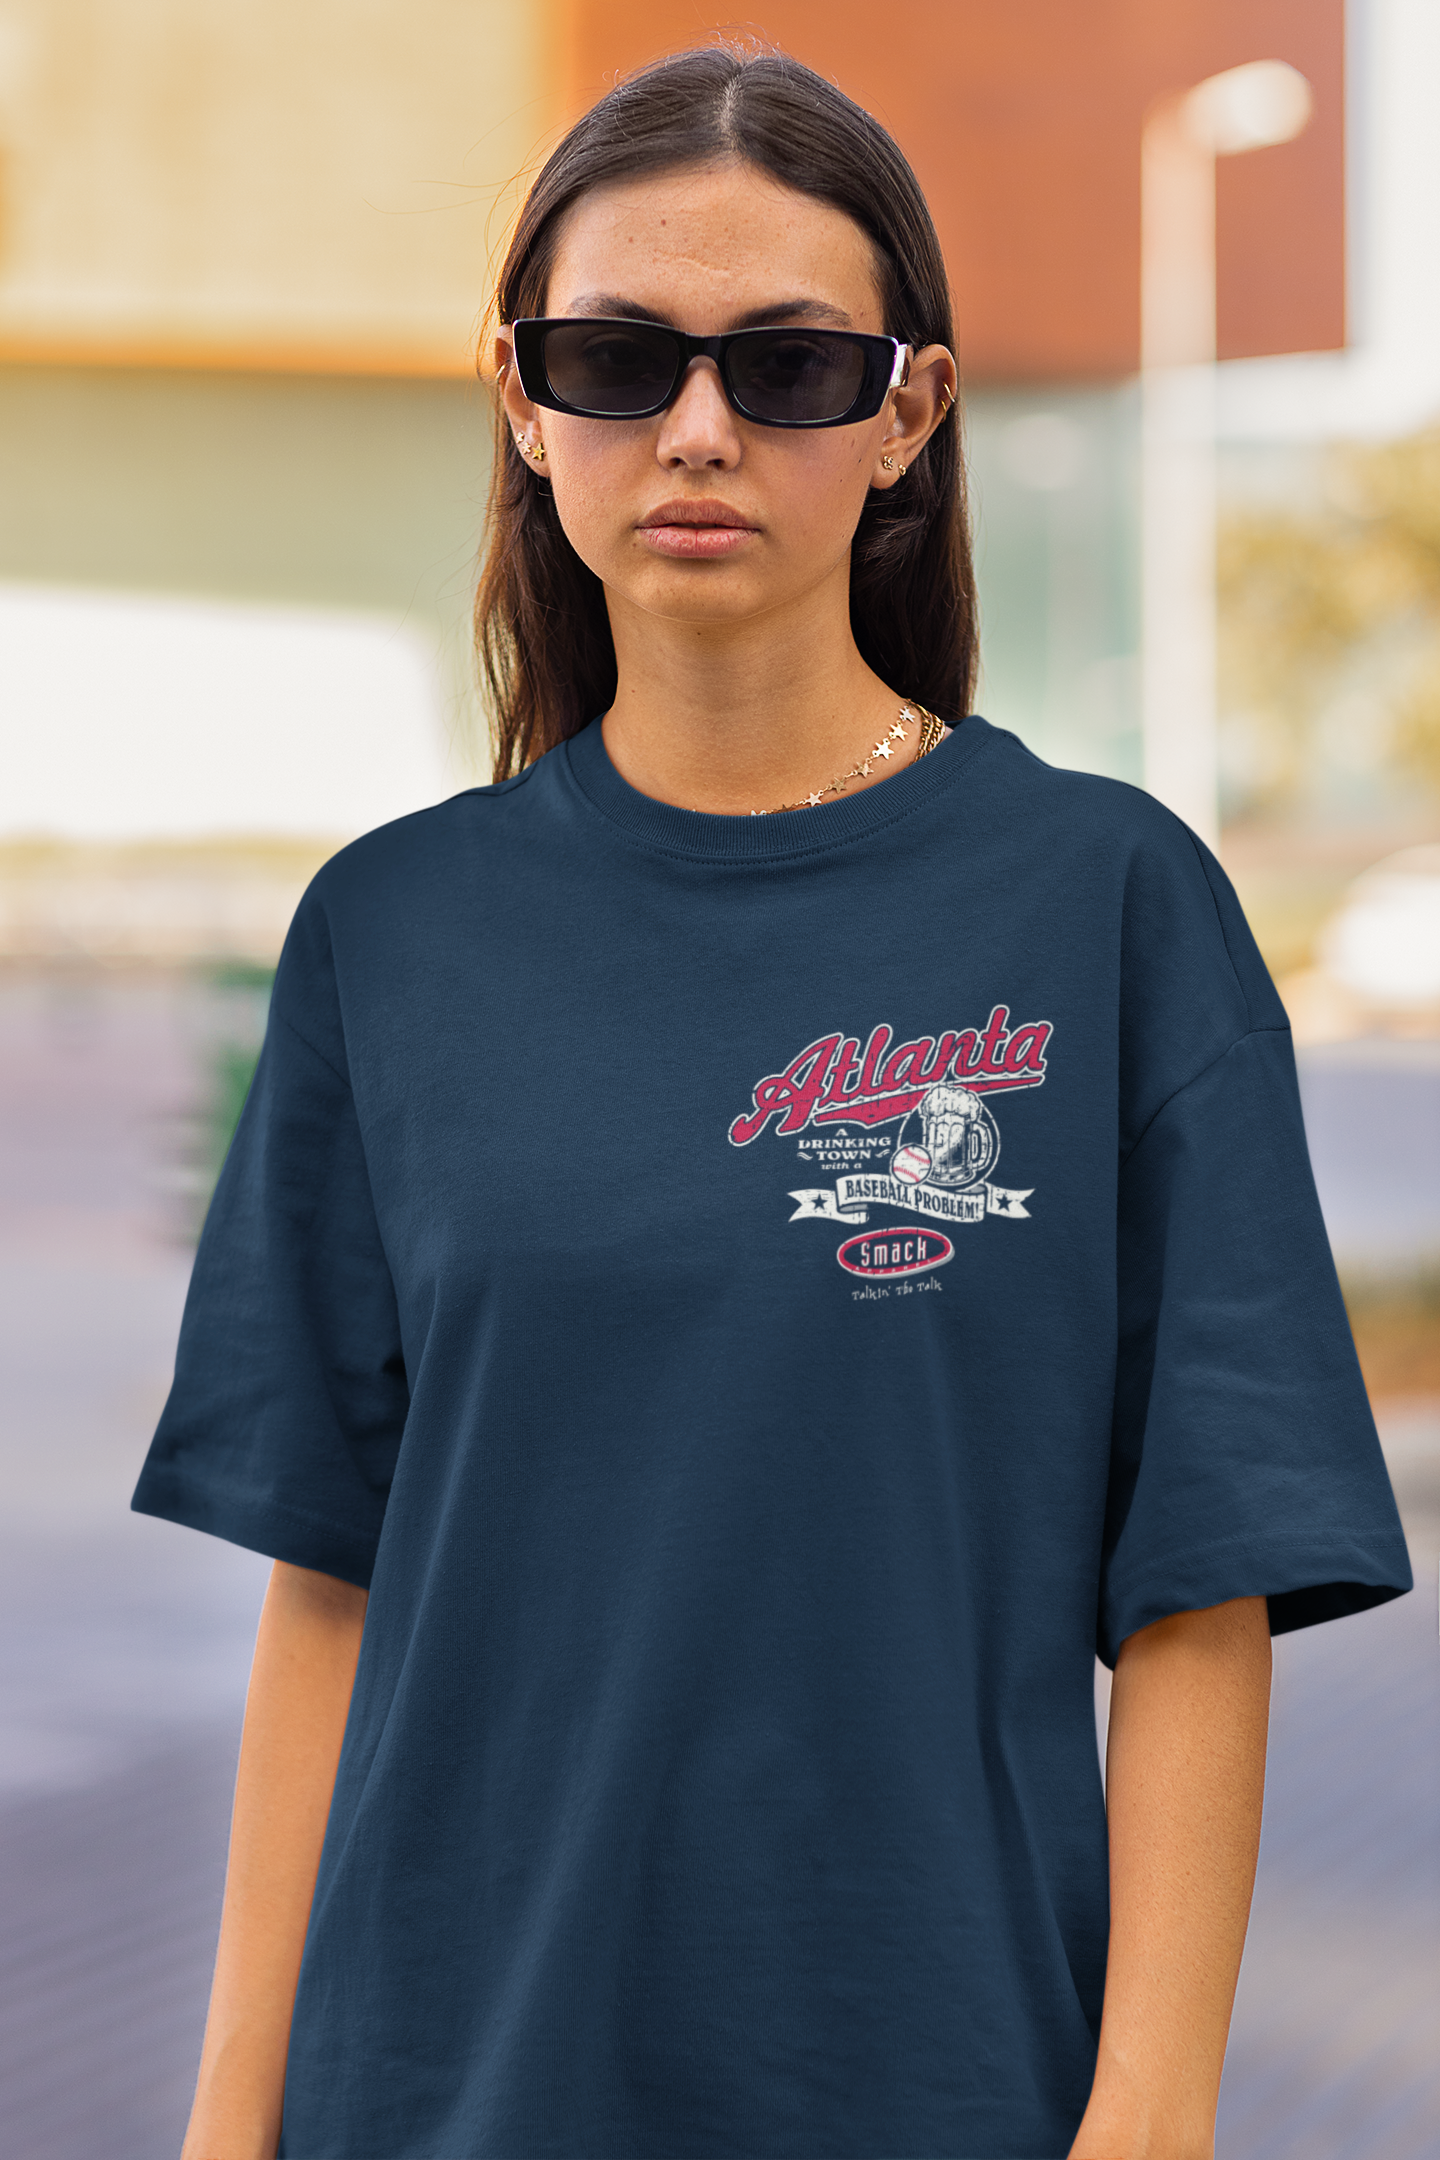 St. Louis Pro Baseball Apparel  St. Louis a Drinking Town with a Base –  Smack Apparel